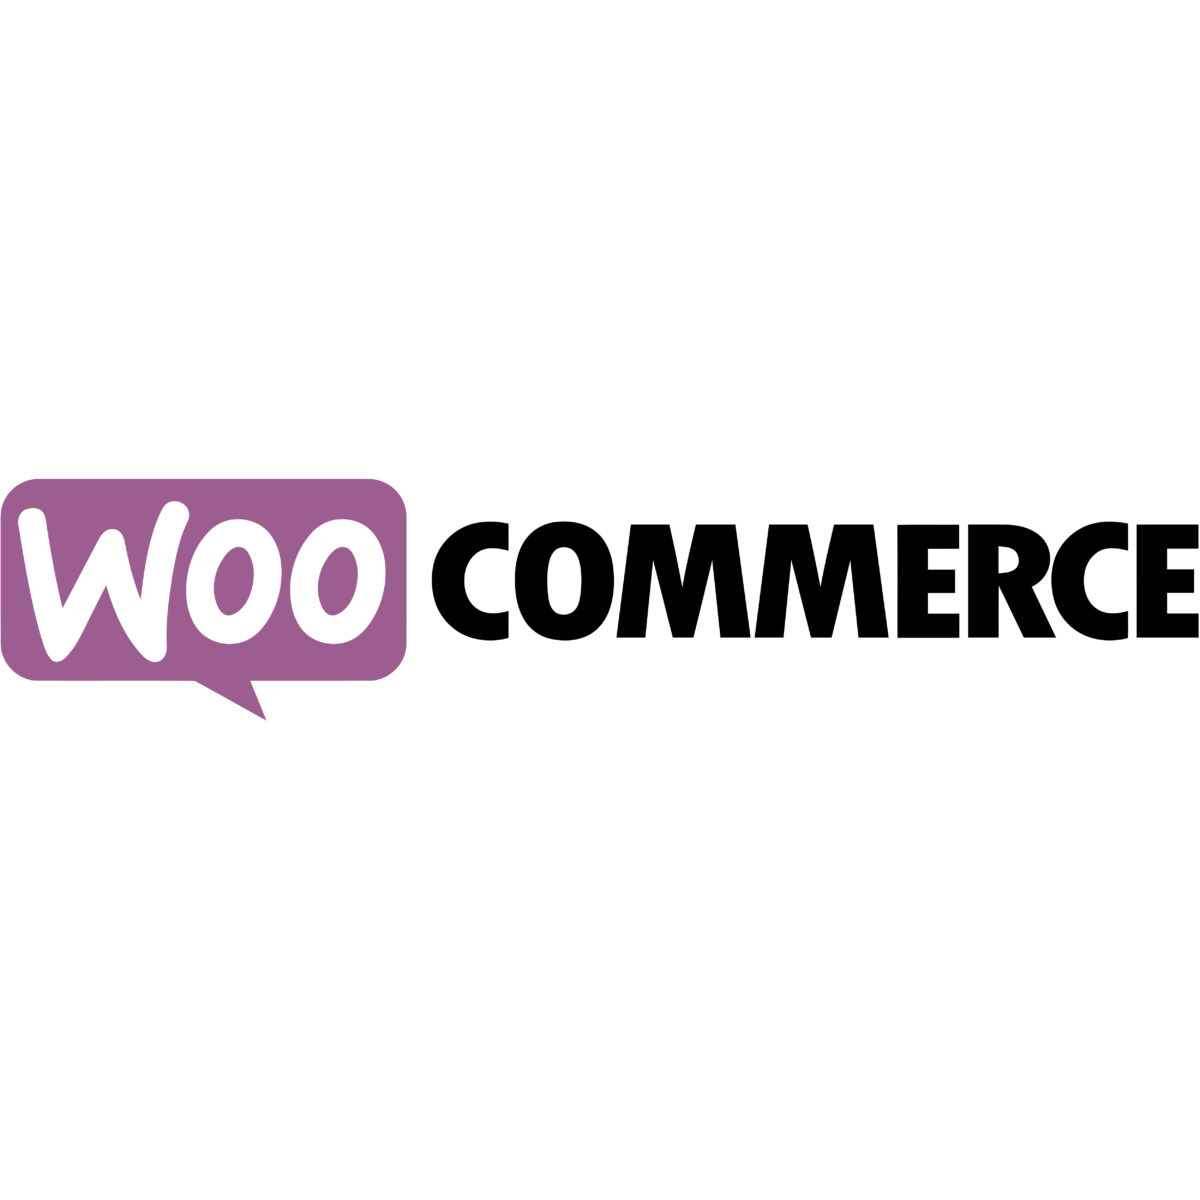 woocommerce-logo-1200x1200-cropped.png